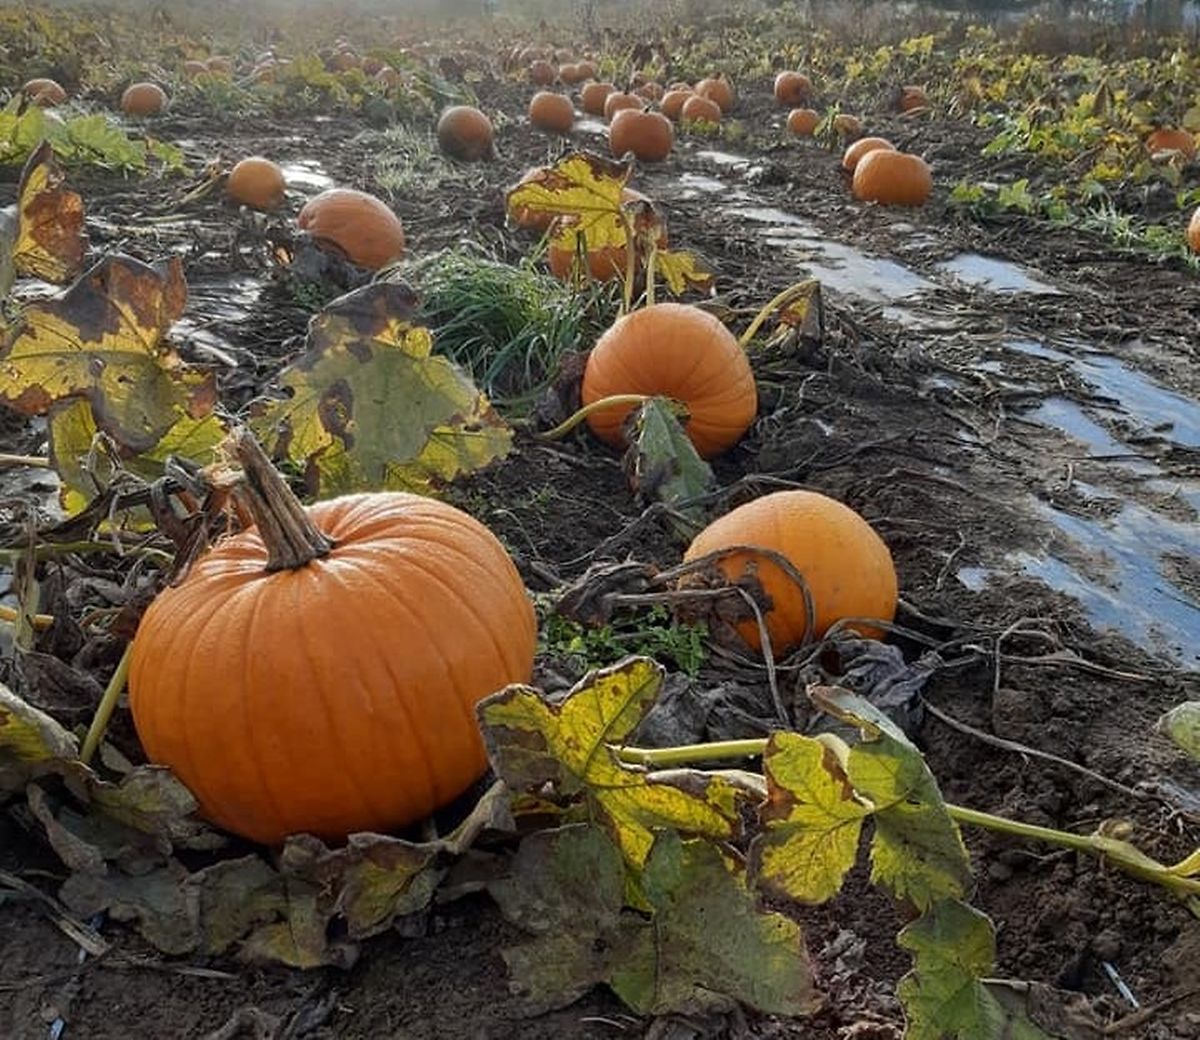 A Lill Haff Famill Peller invites you to pick your own pumpkins, flowers, corn, and vegetables, and sells fresh fruit in season